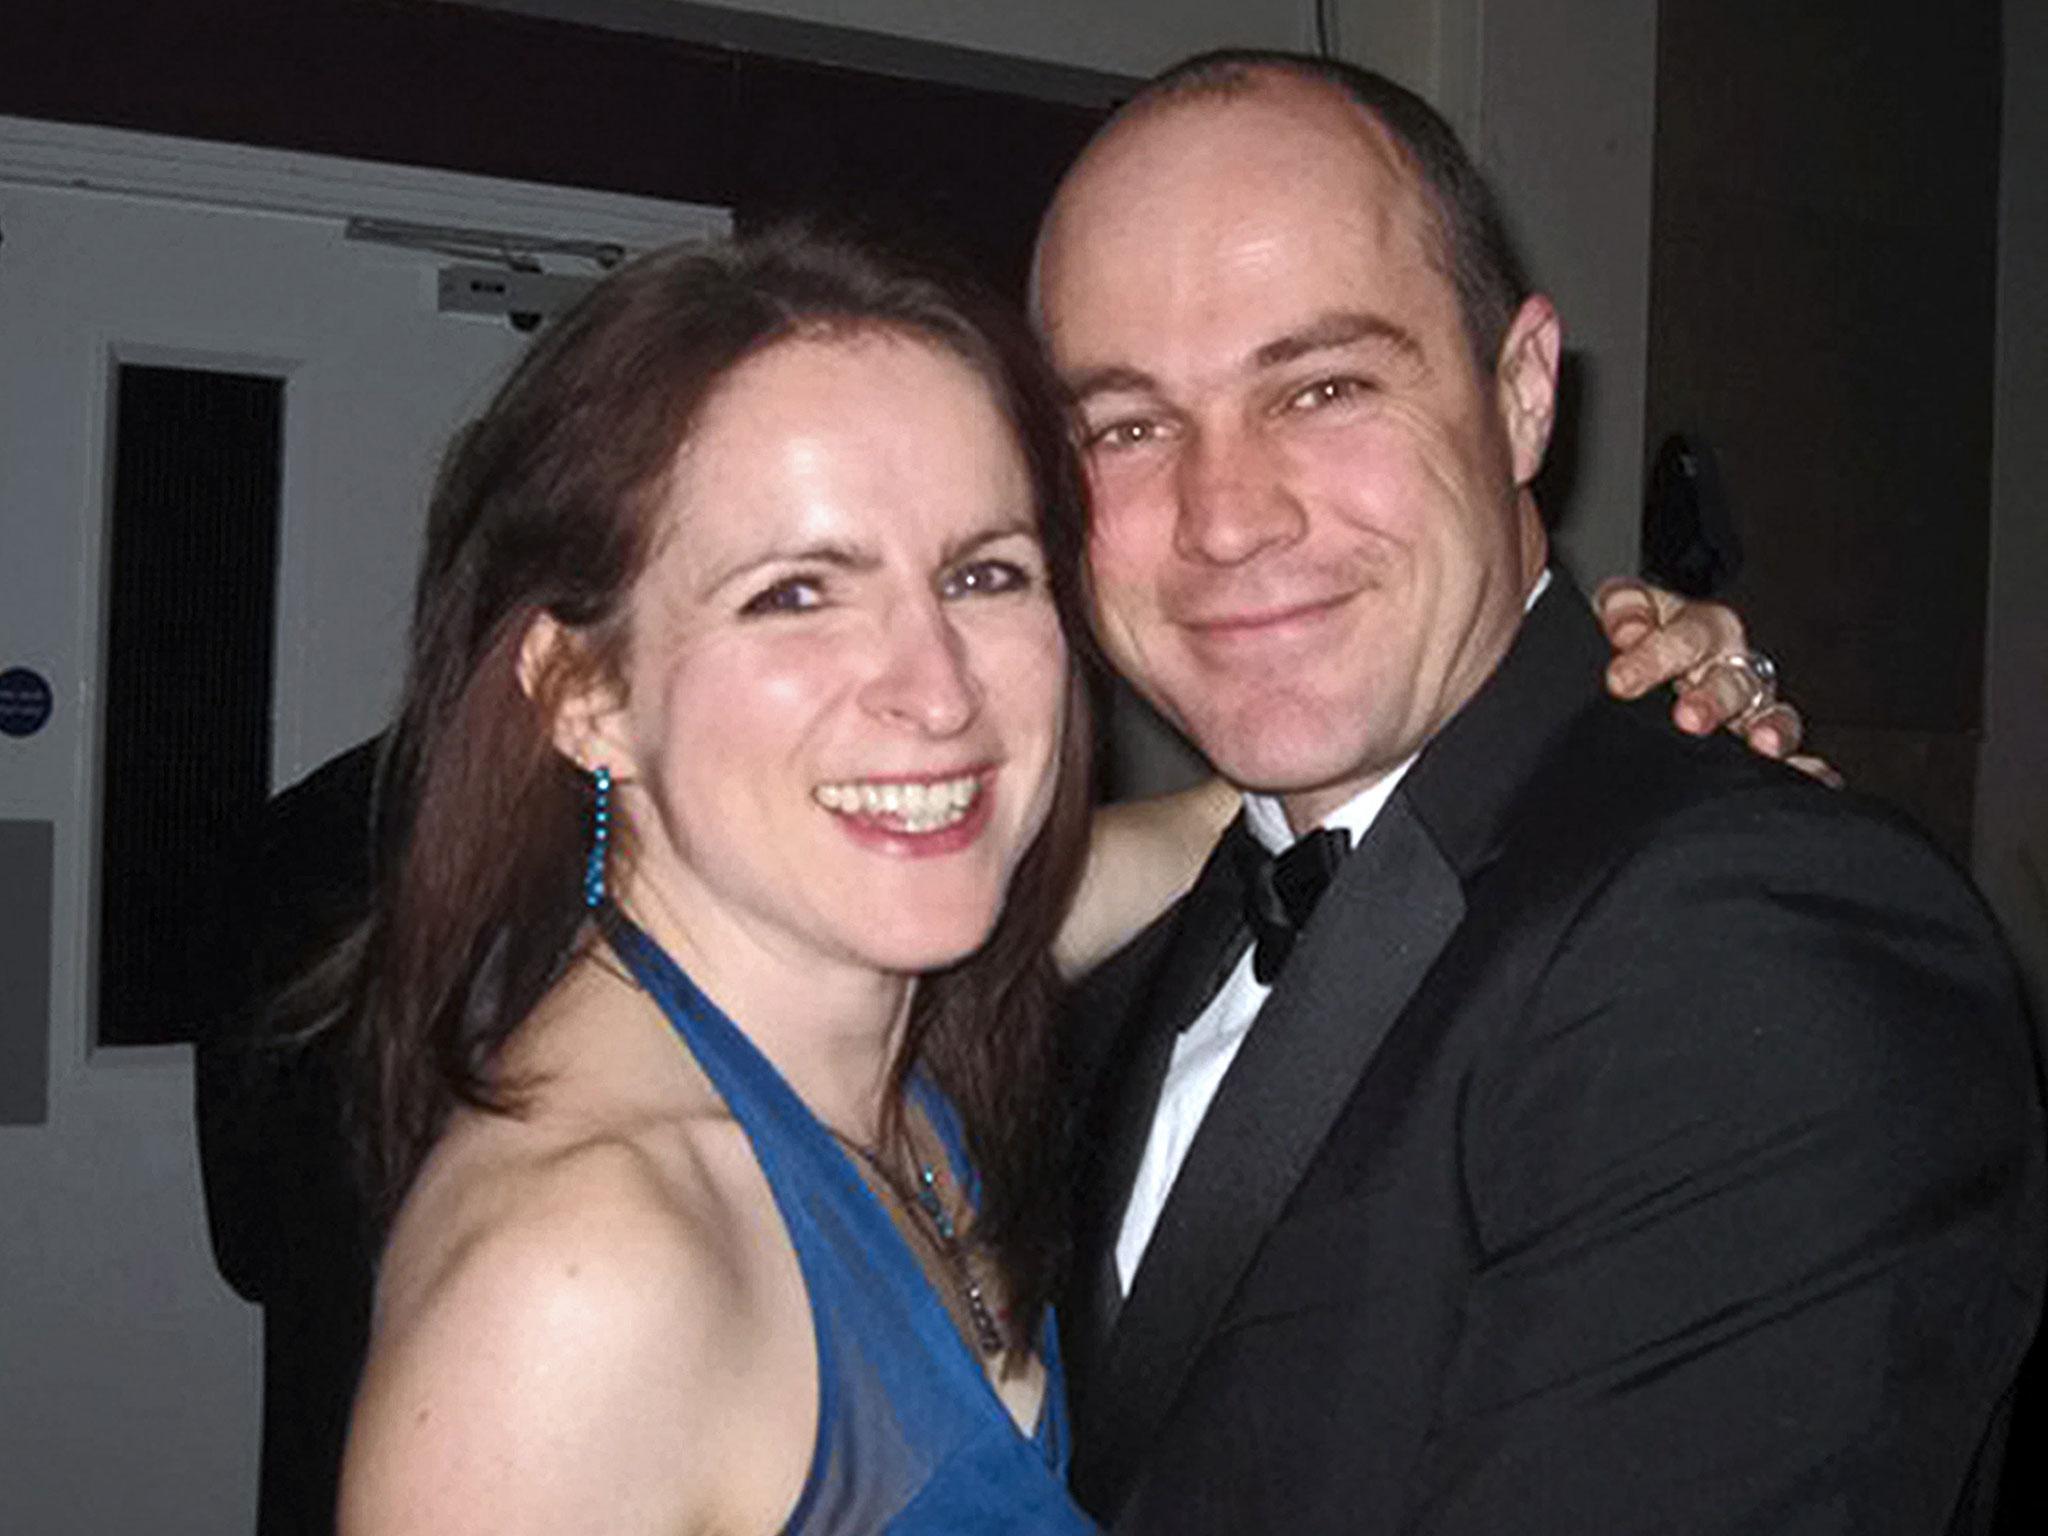 Emile Cilliers is accused of attempting to murder his wife Victoria during a skydive